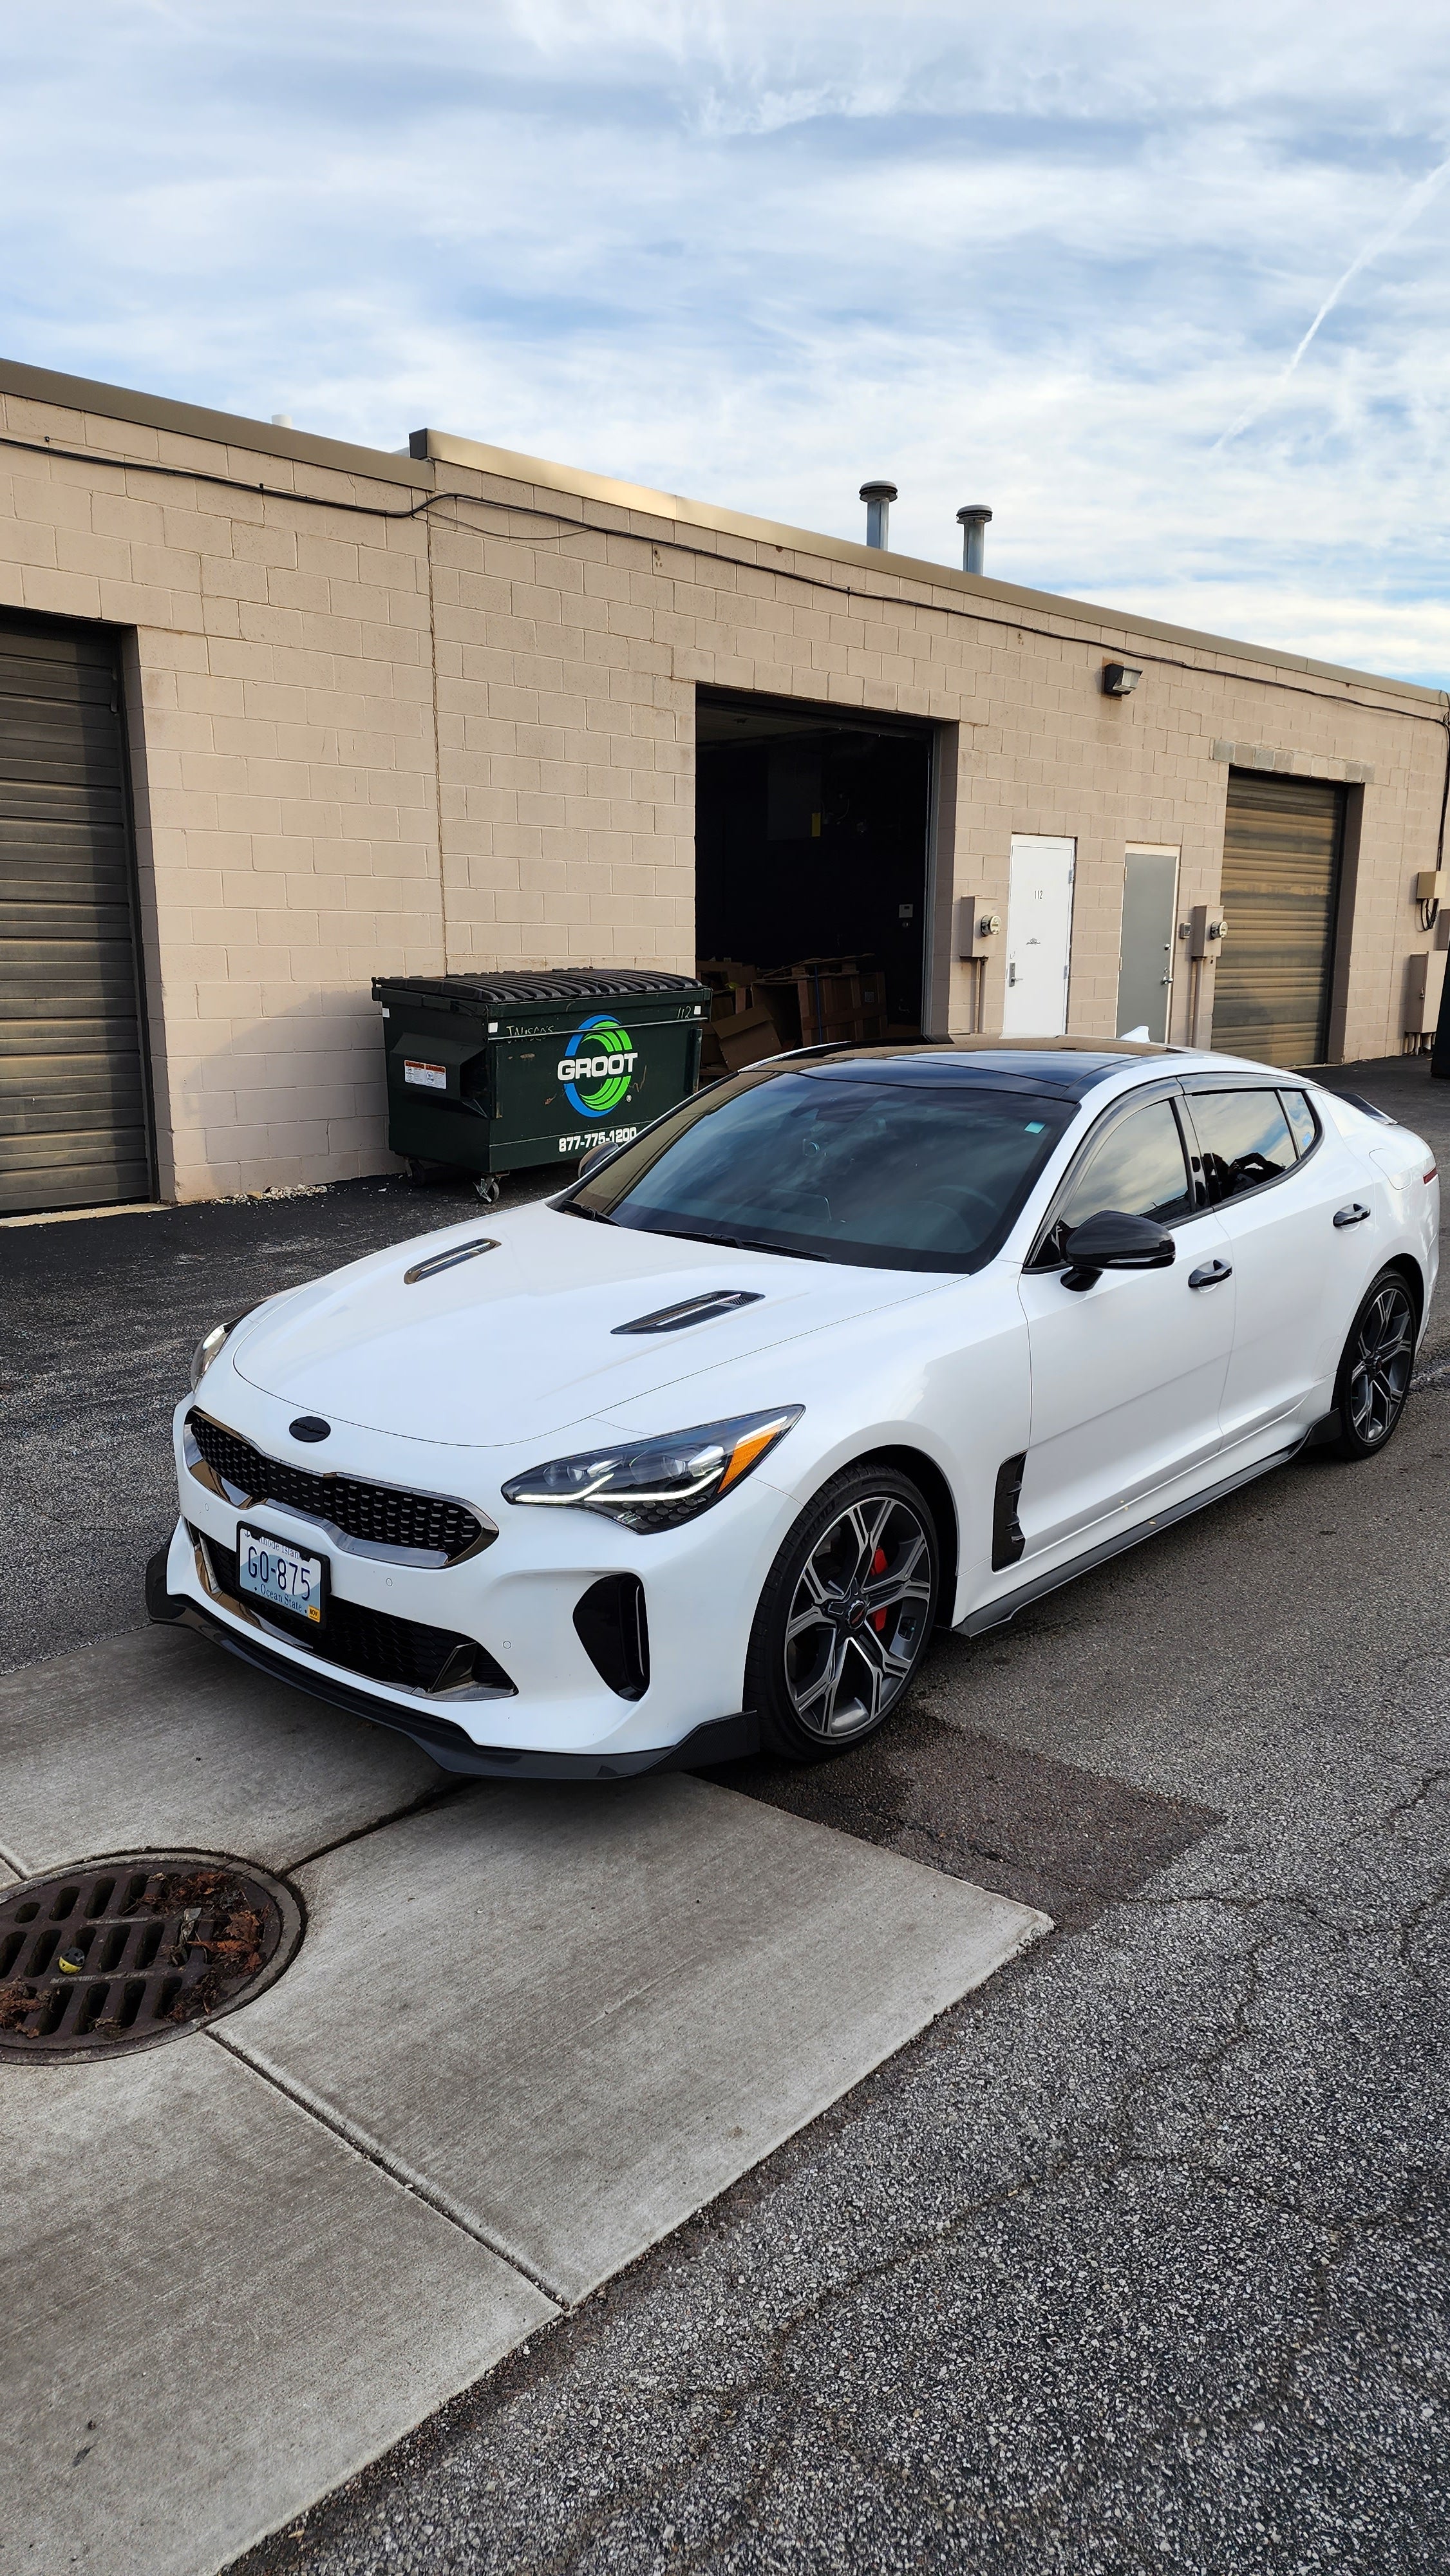 Direct front view of the Kia Stinger equipped with Jalisco's CarbonFiber Front Lip, focusing on the lip's integration with the car's overall design